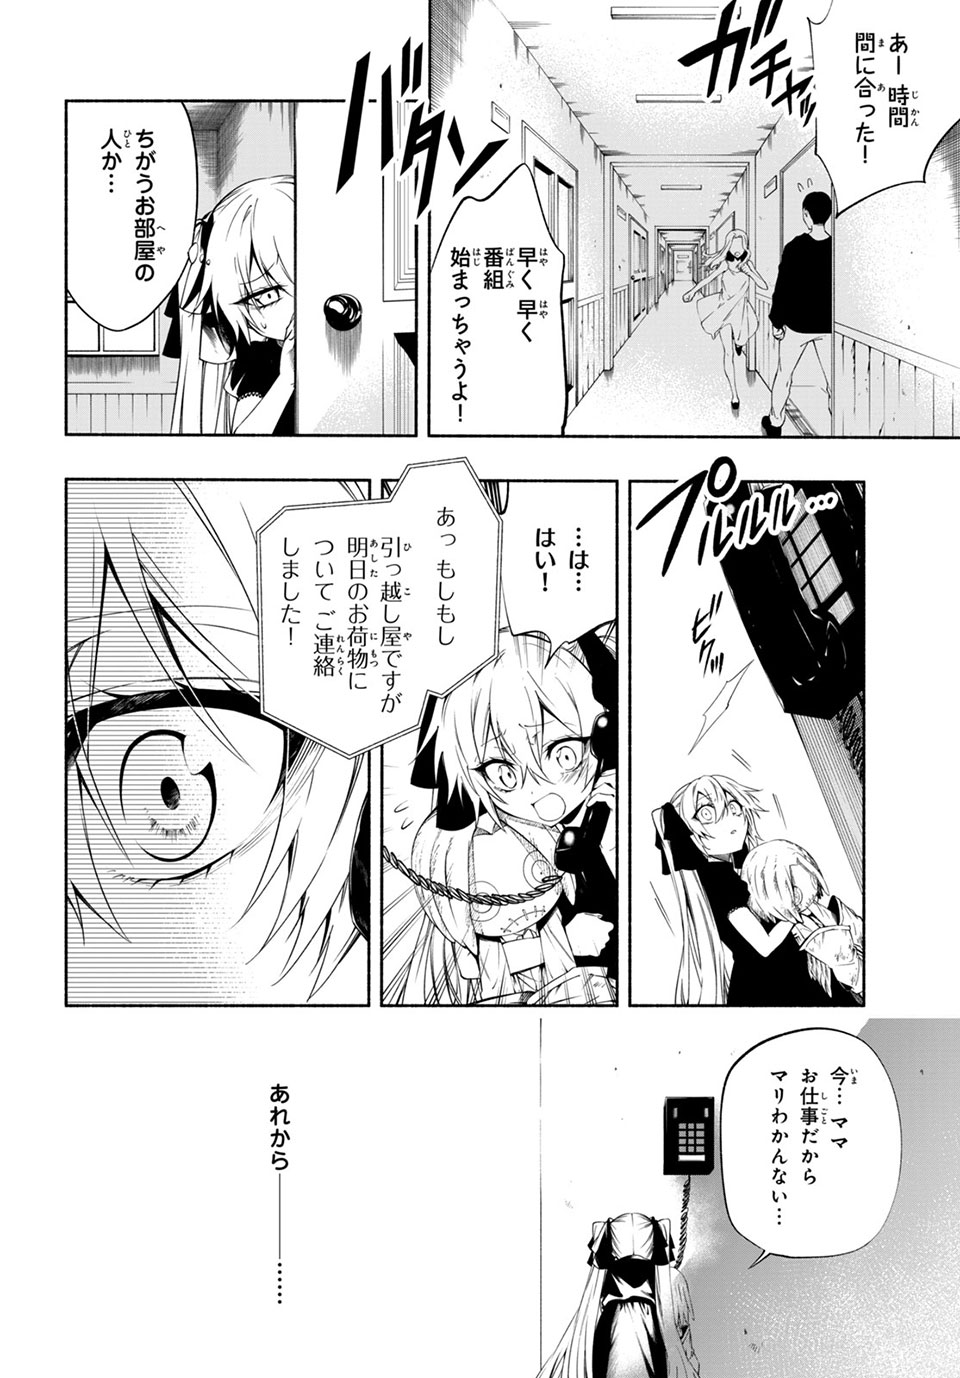 Shaman King: and a garden 第13.2話 - Page 10